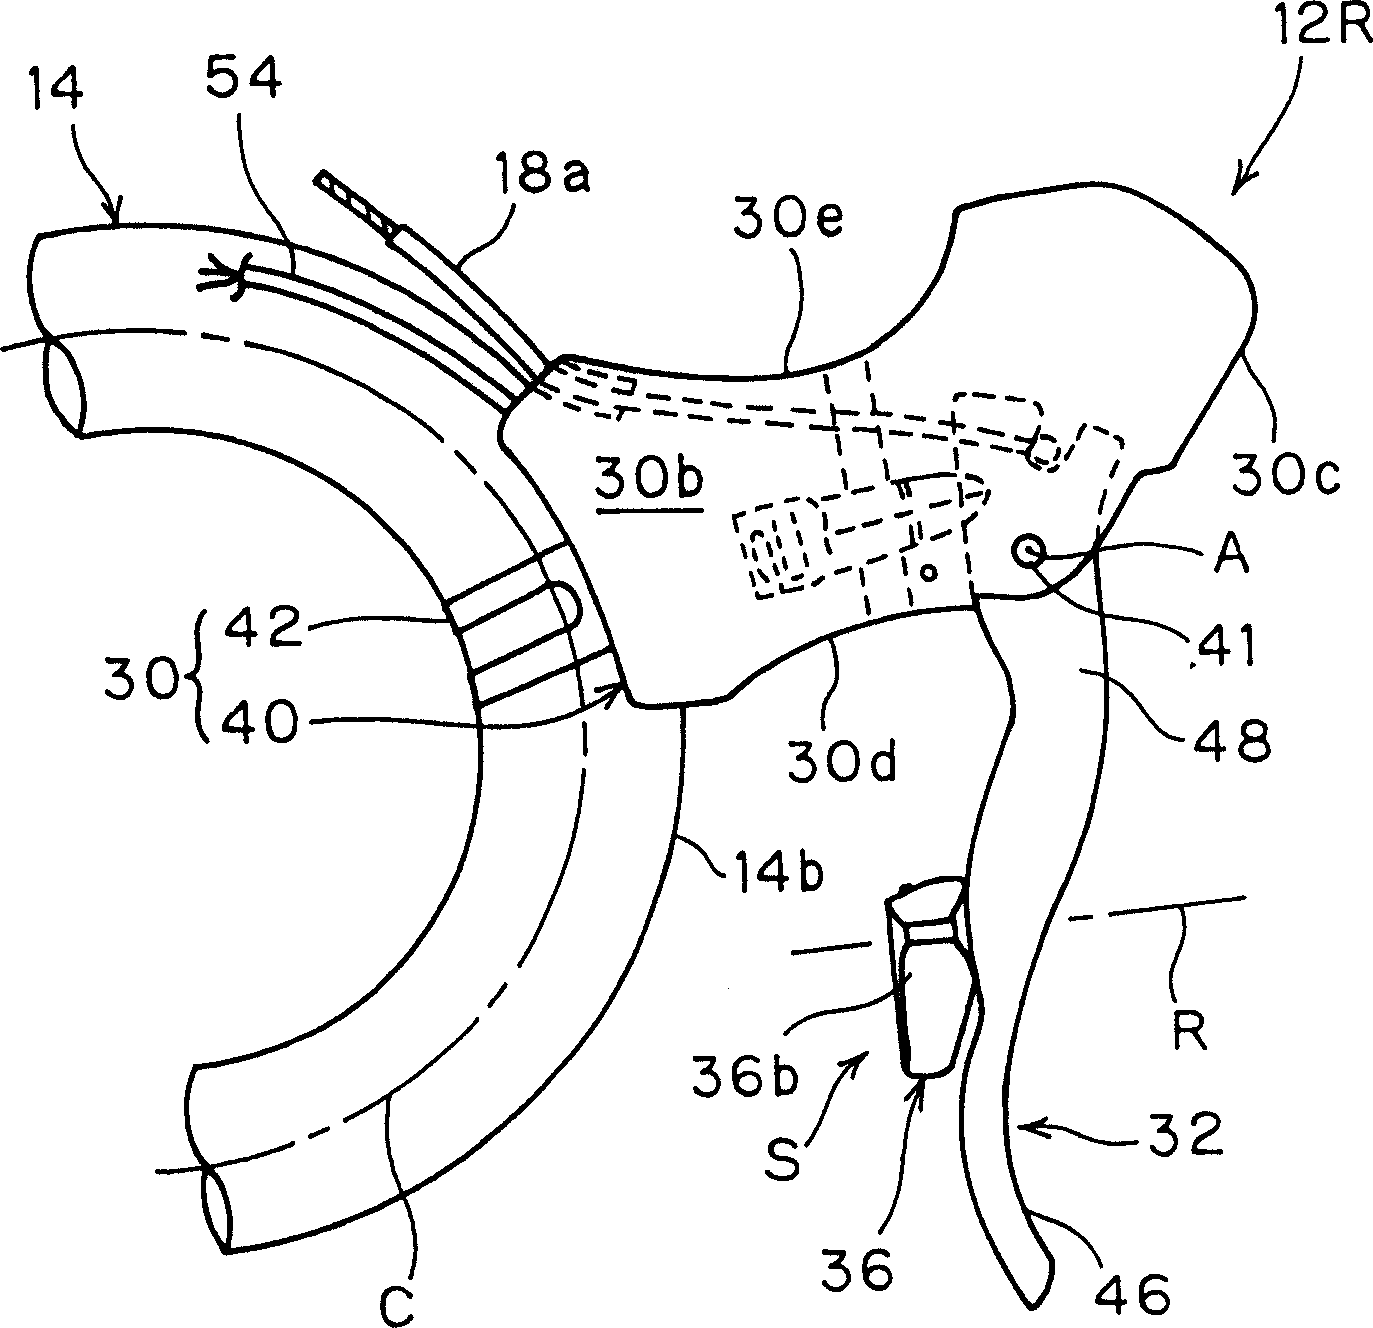 Bicycle brake control device with electrical operating member